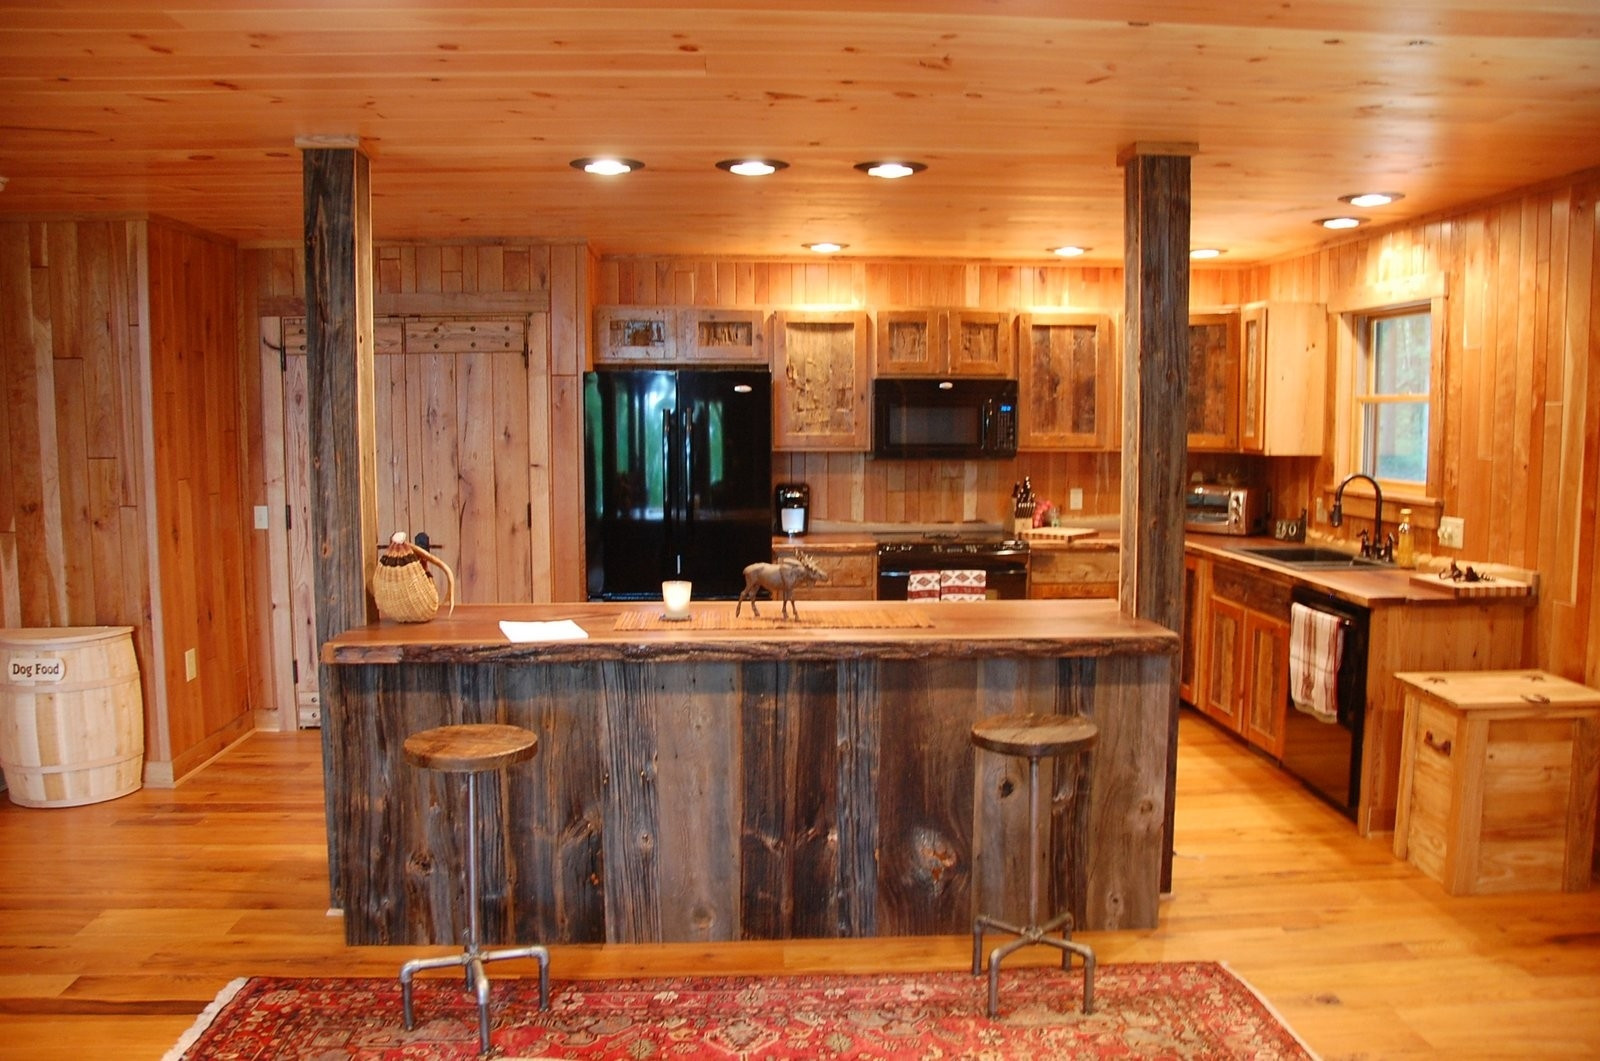 Small Rustic Kitchen Ideas
 30 ELEGANT WOODEN KITCHEN DESIGNS TO GIVE A RUSTIC LOOK